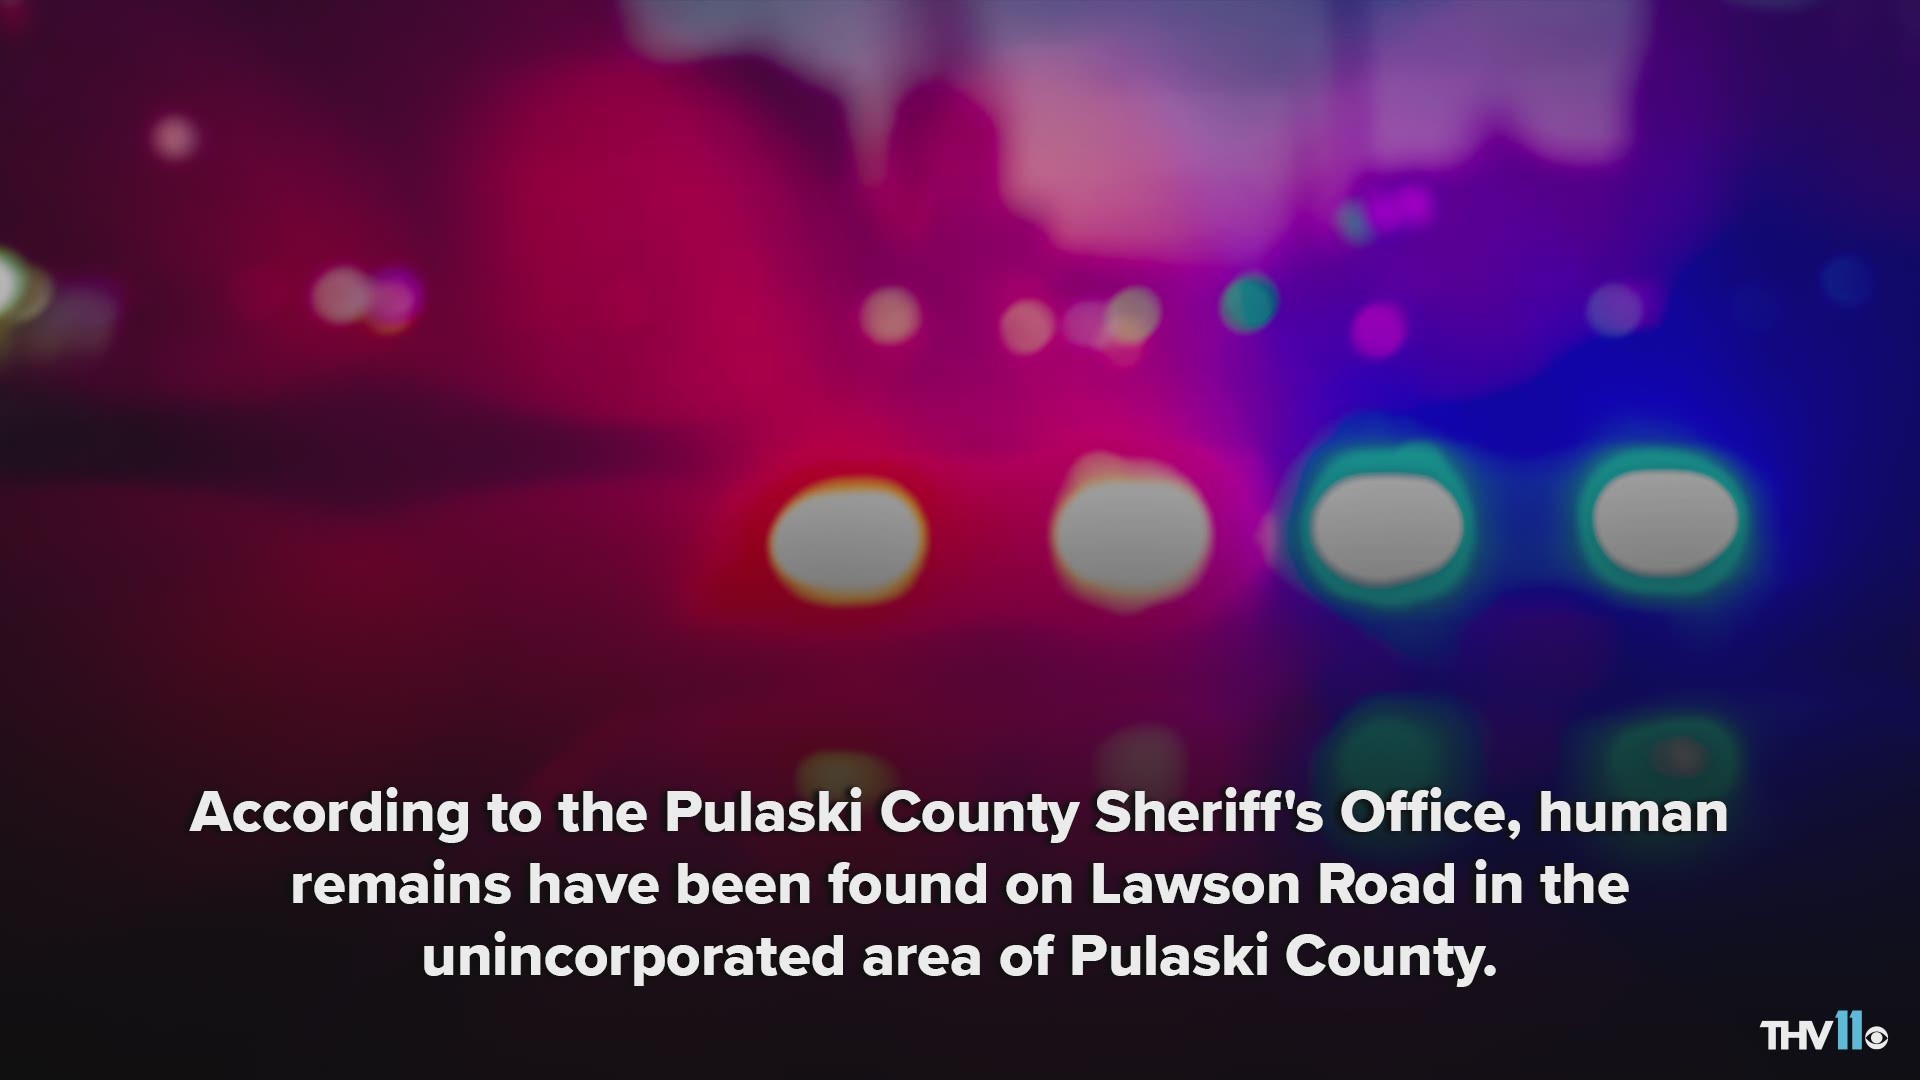 According to the Pulaski County Sheriff's Office, human remains have been found on Lawson Road in the unincorporated area of Pulaski County.